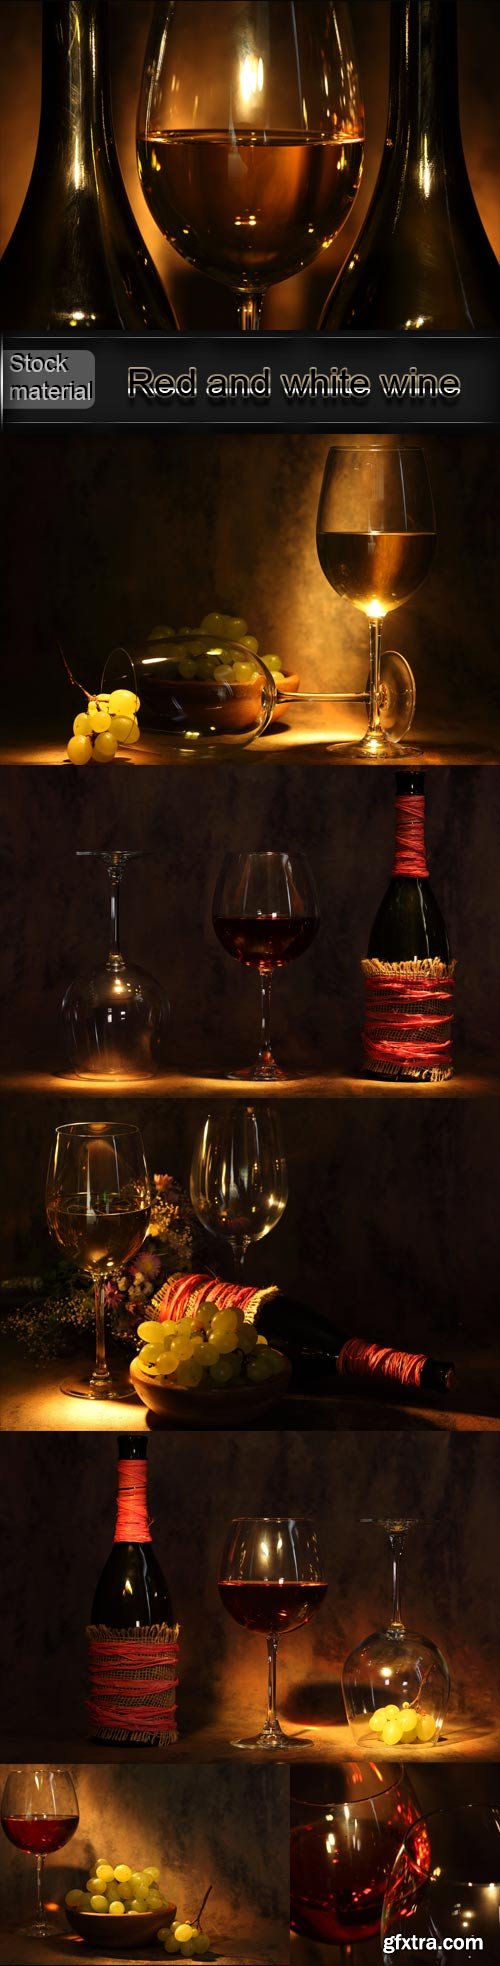 Red and white wine in bottles and glasses